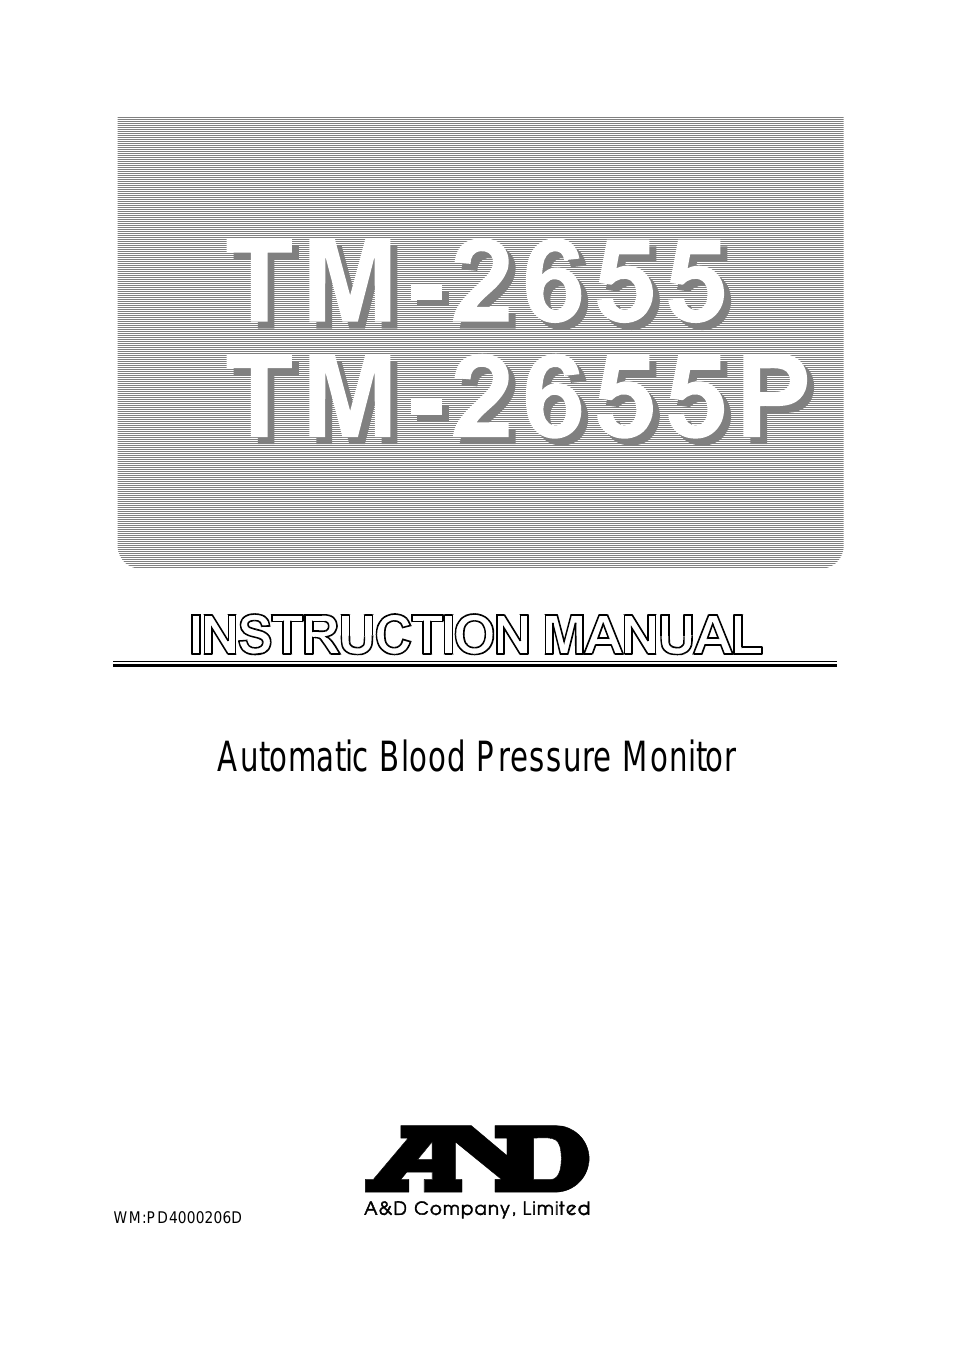 Automatic Blood Pressure Monitor TM-2655P (Page 1)